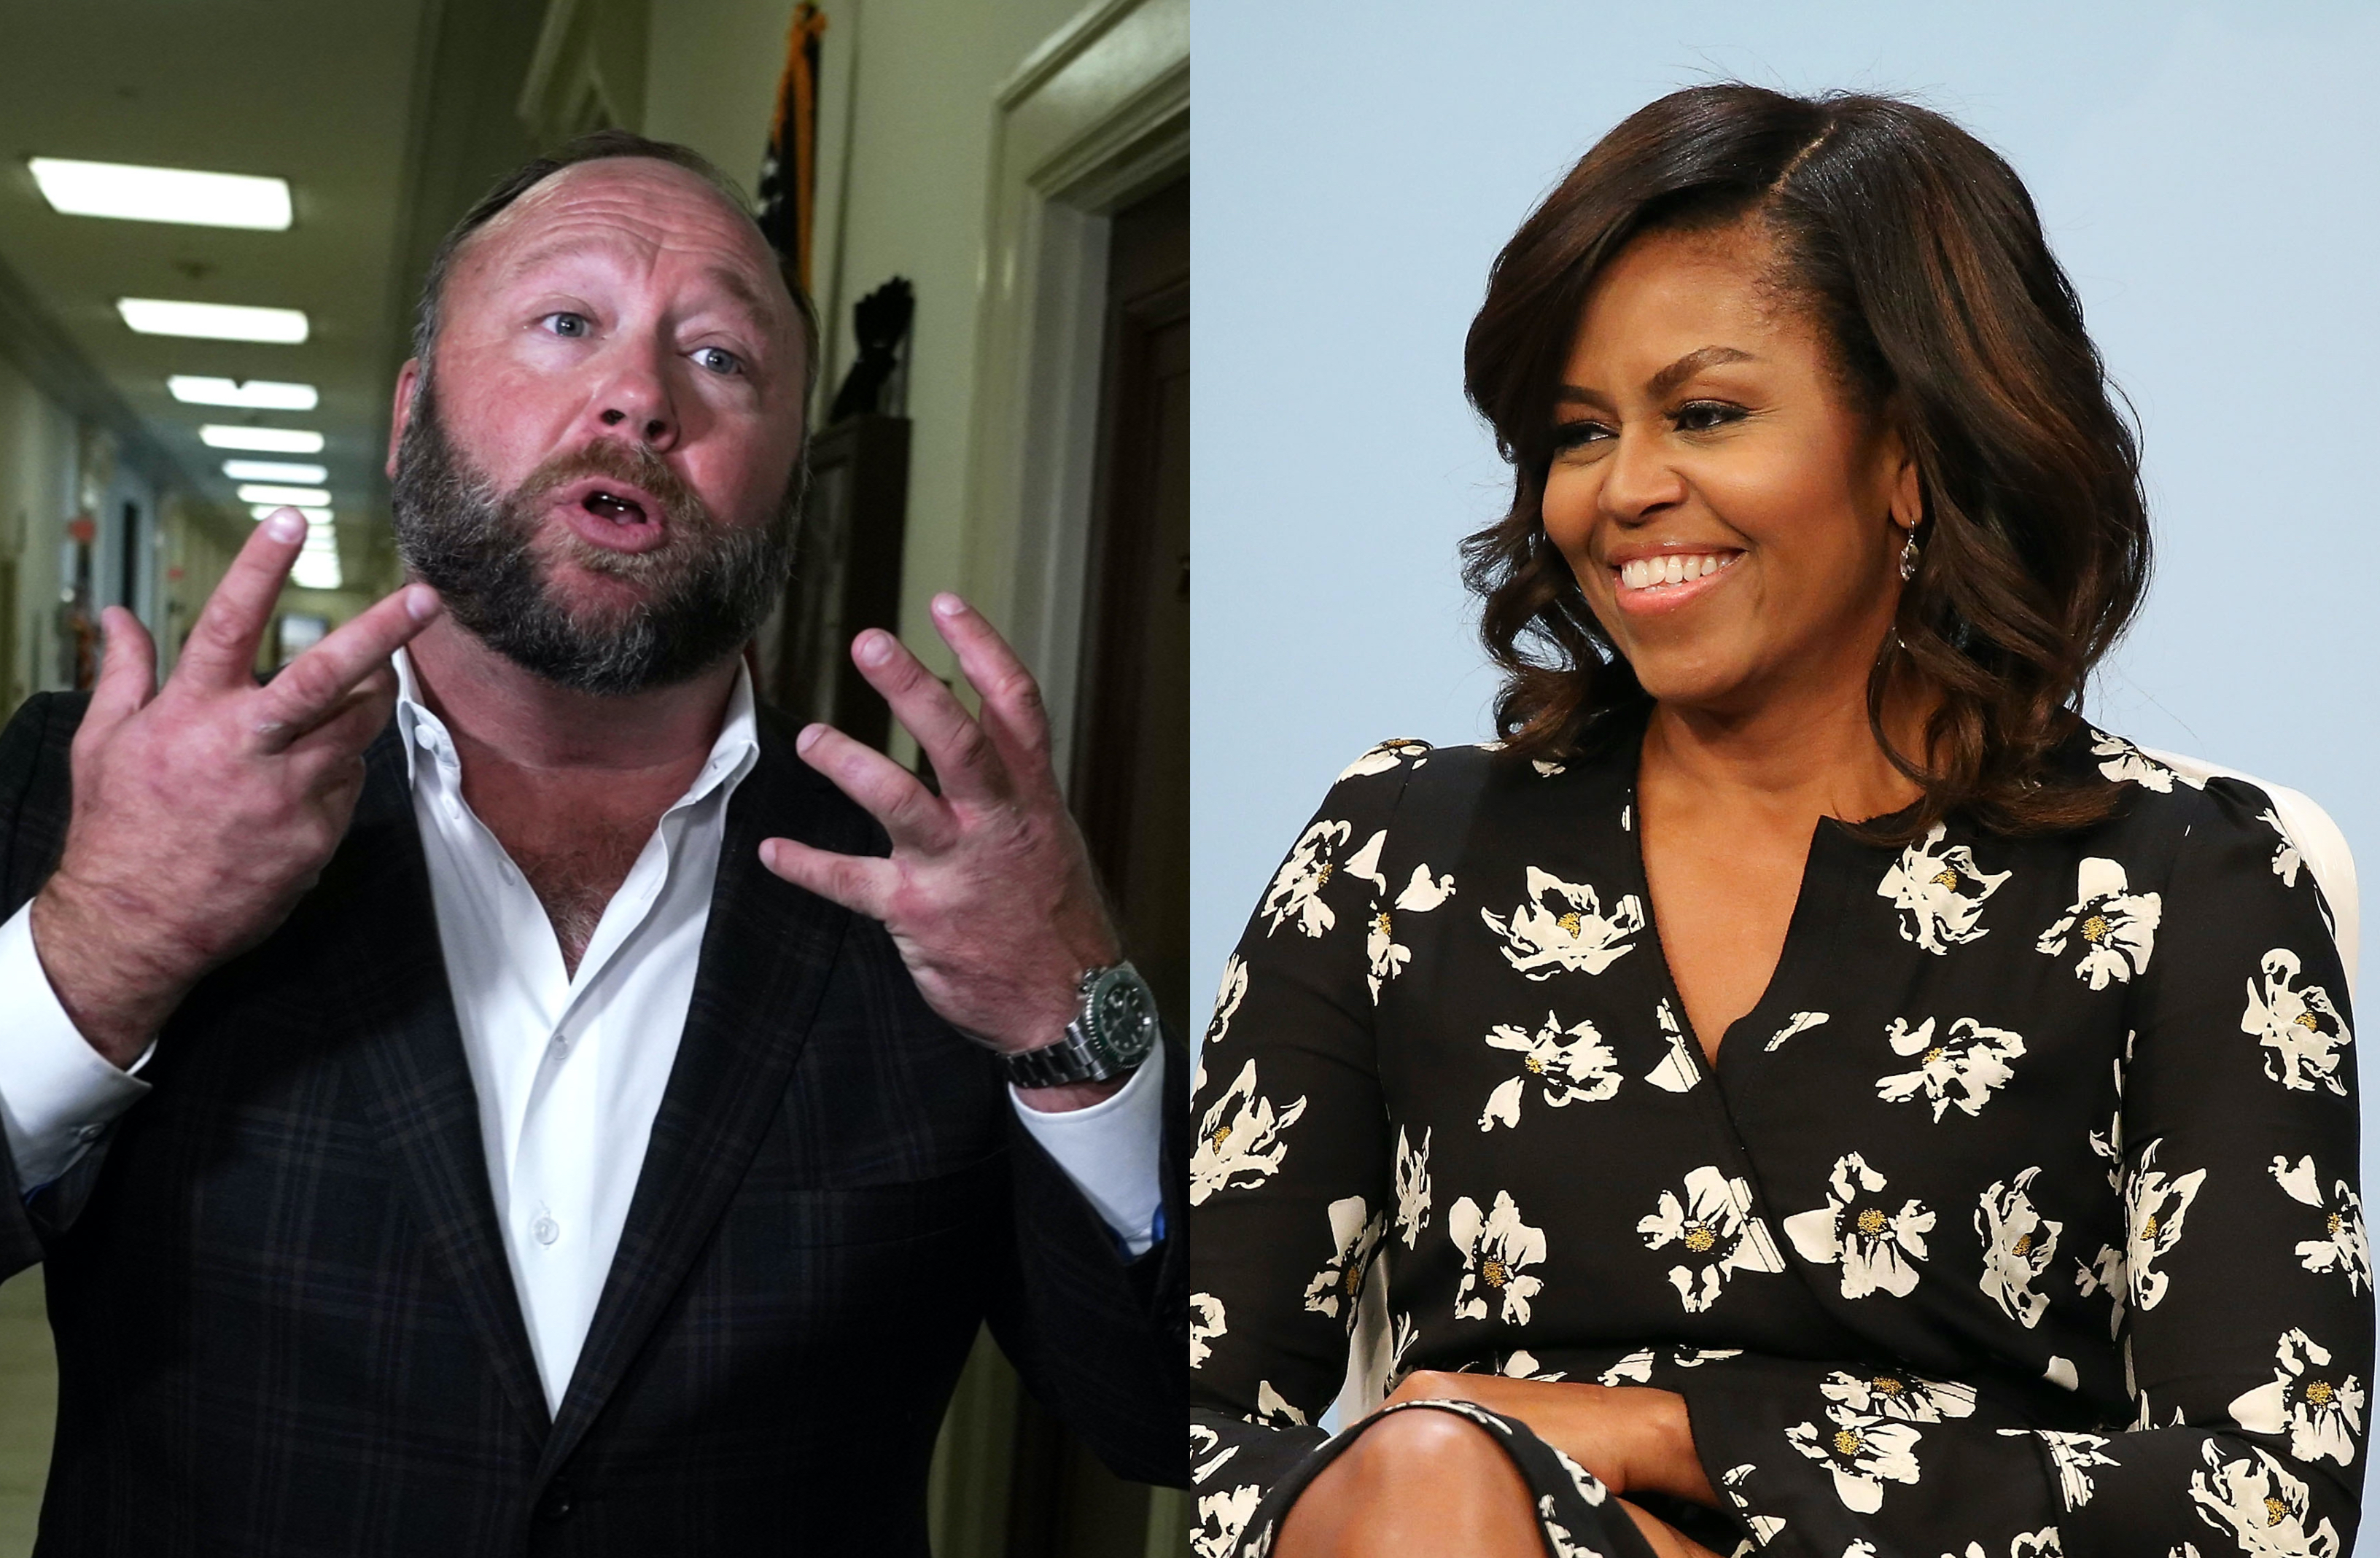 Conspiracy theorist claims Michelle Obama is transgender. Yes, really